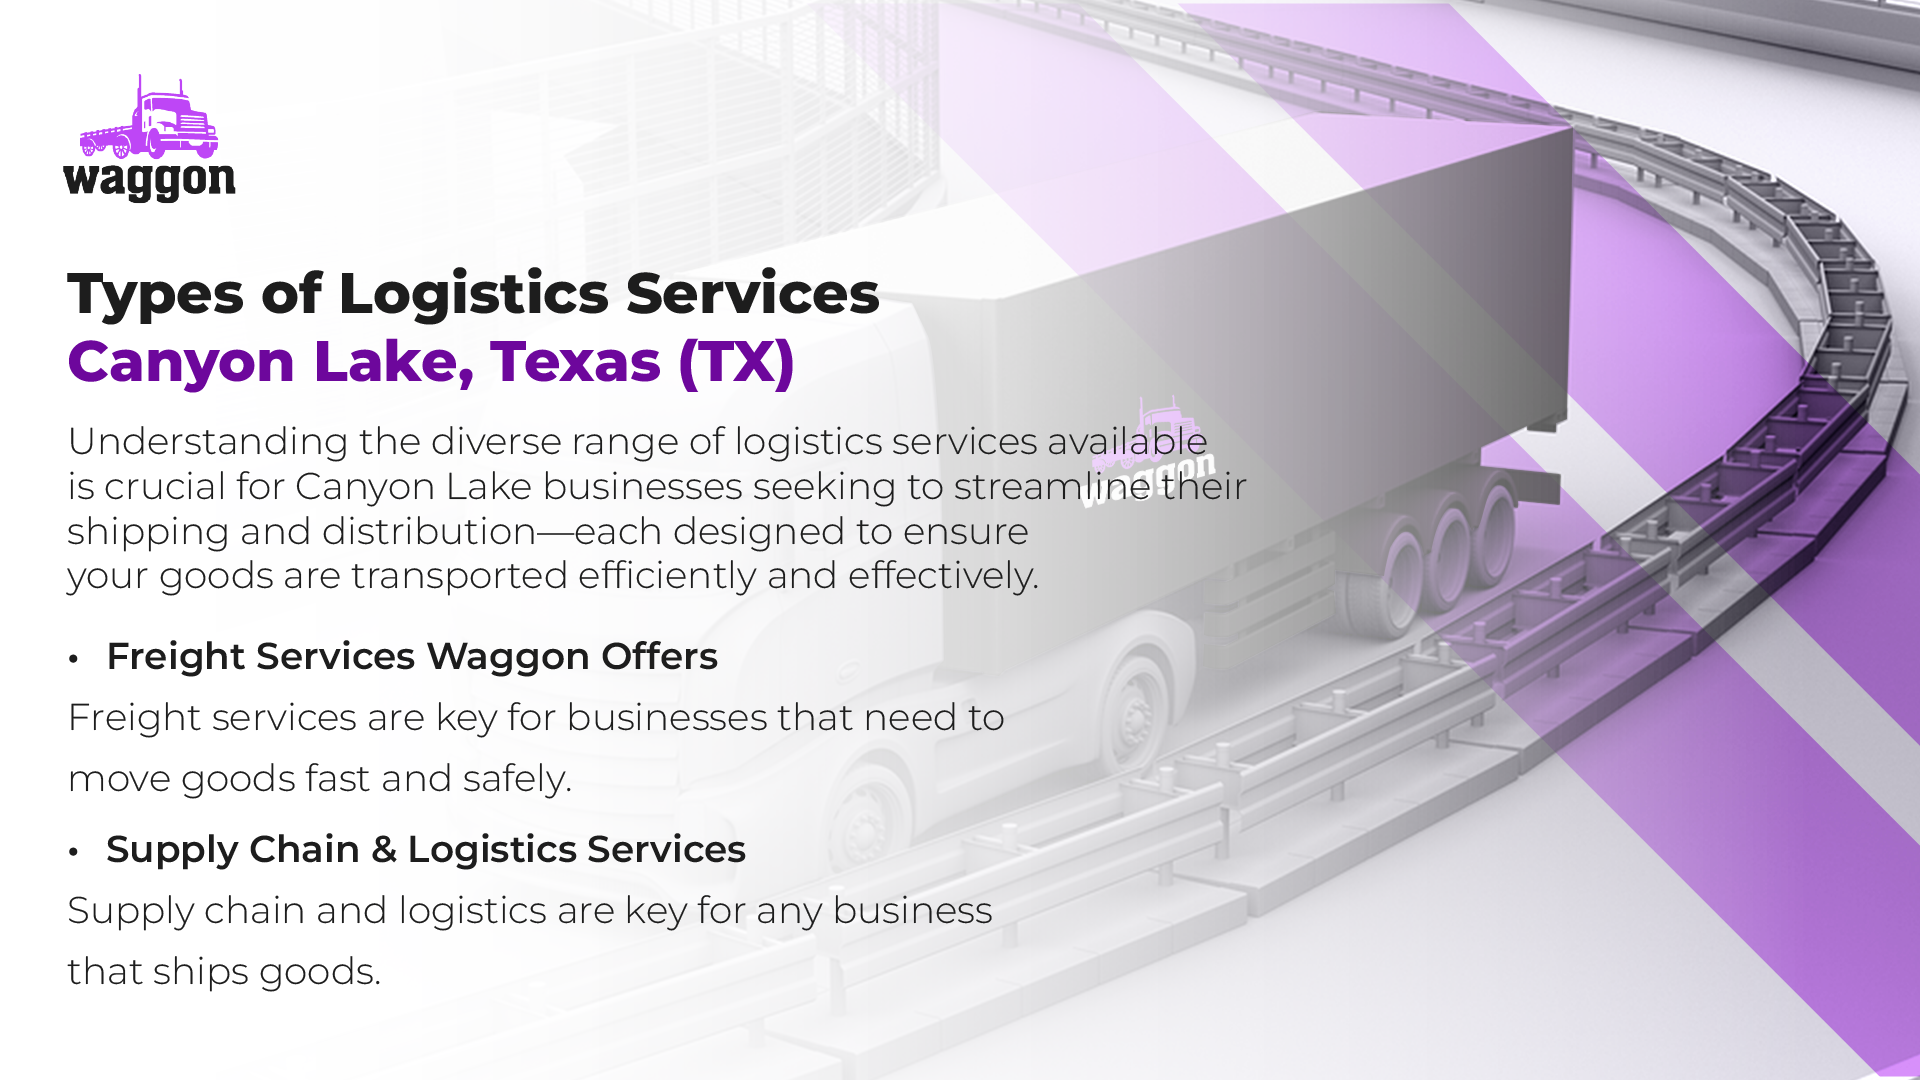 Types of Logistics Services in Canyon Lake, Texas (TX)